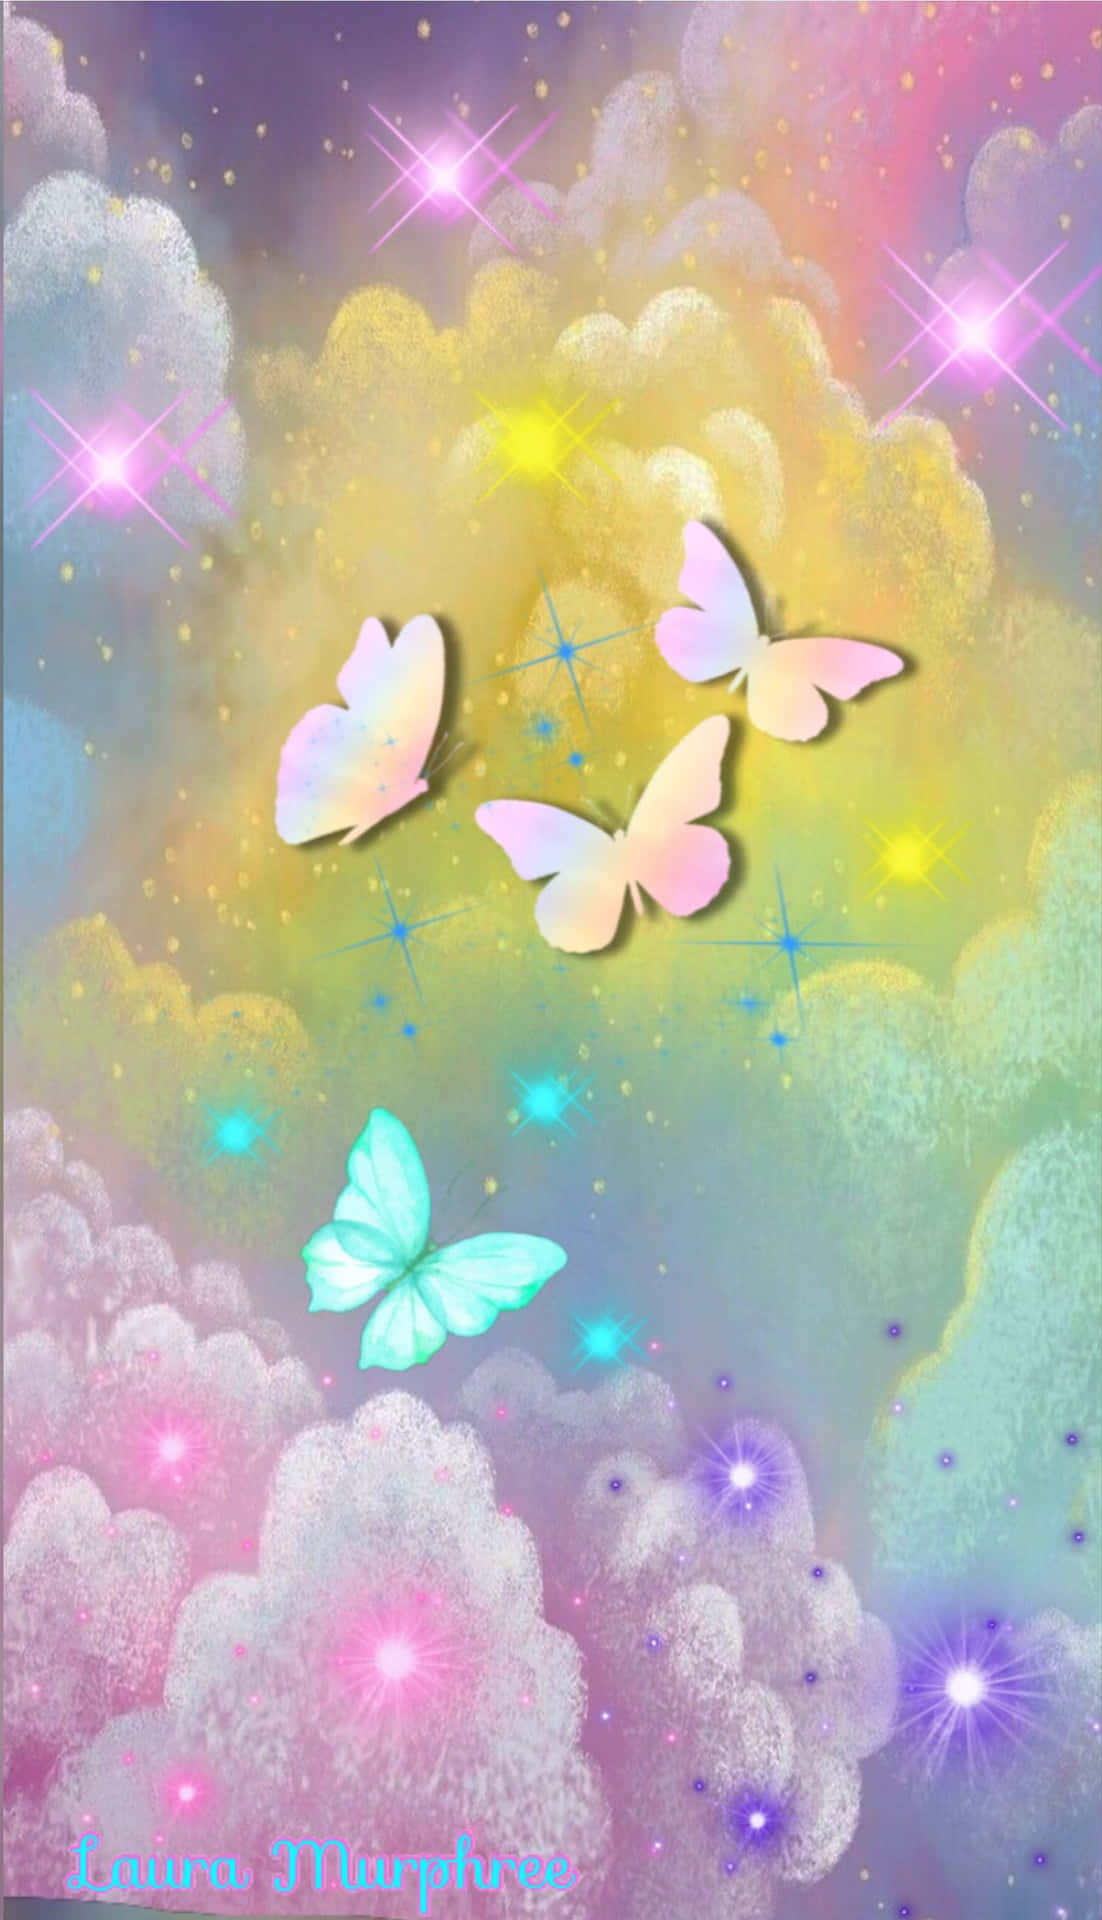 A Colorful Painting Of Butterflies Flying In The Sky Wallpaper